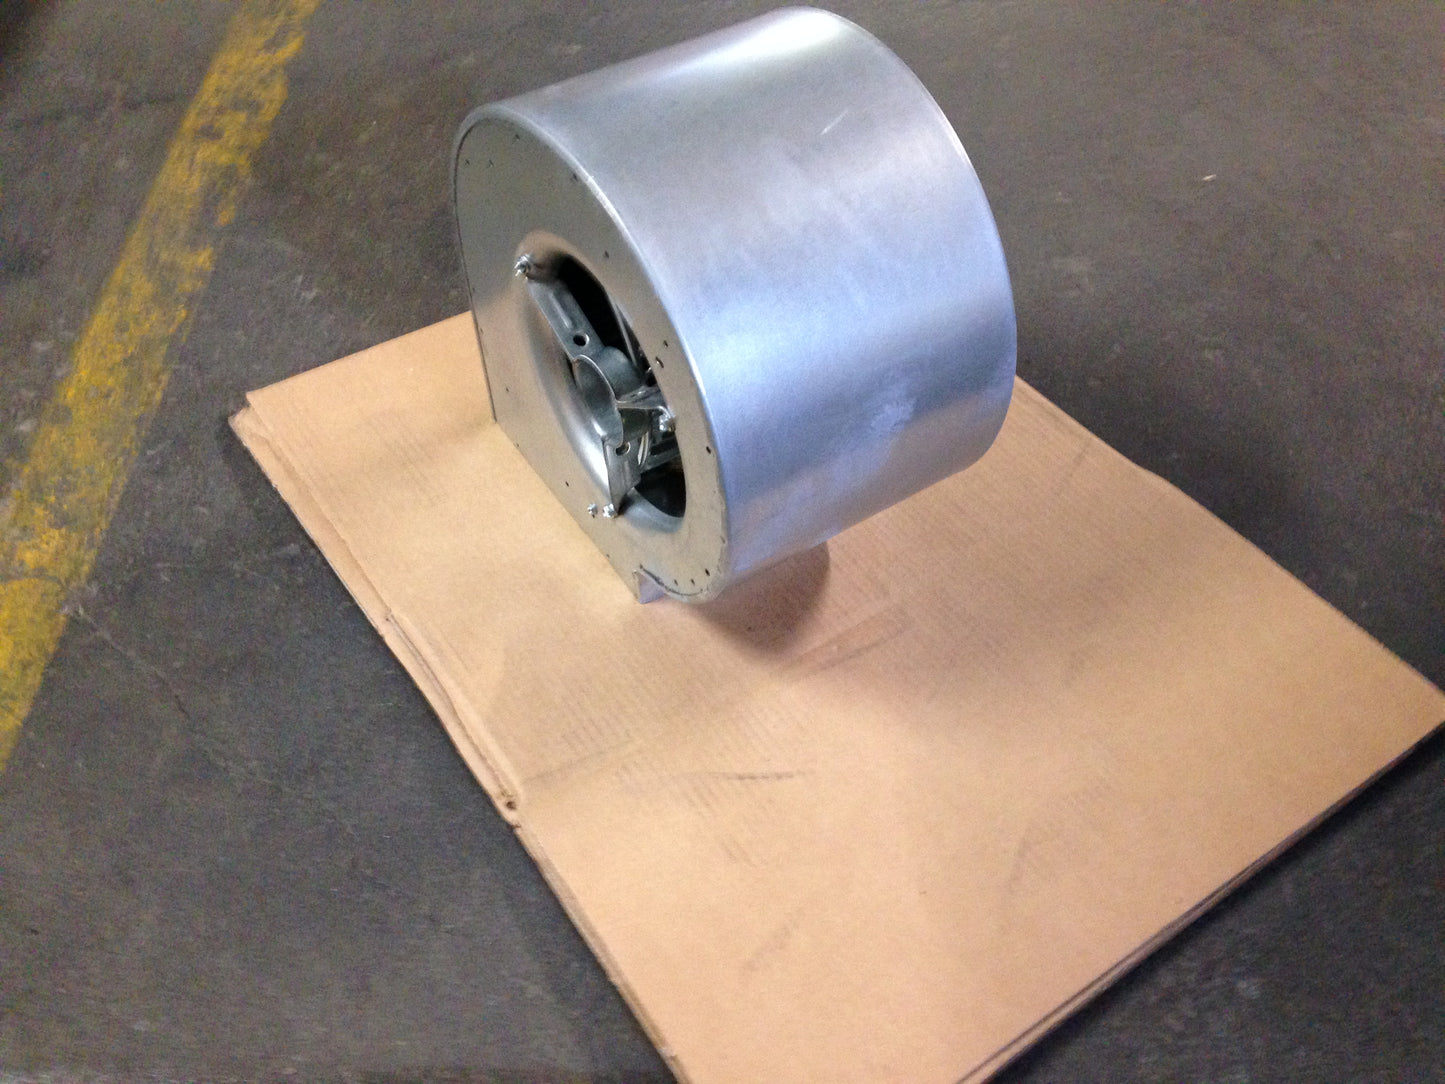 BLOWER WHEEL AND HOUSING ASSEMBLY 15"H X 9 1/4"W X 18 1/4"L